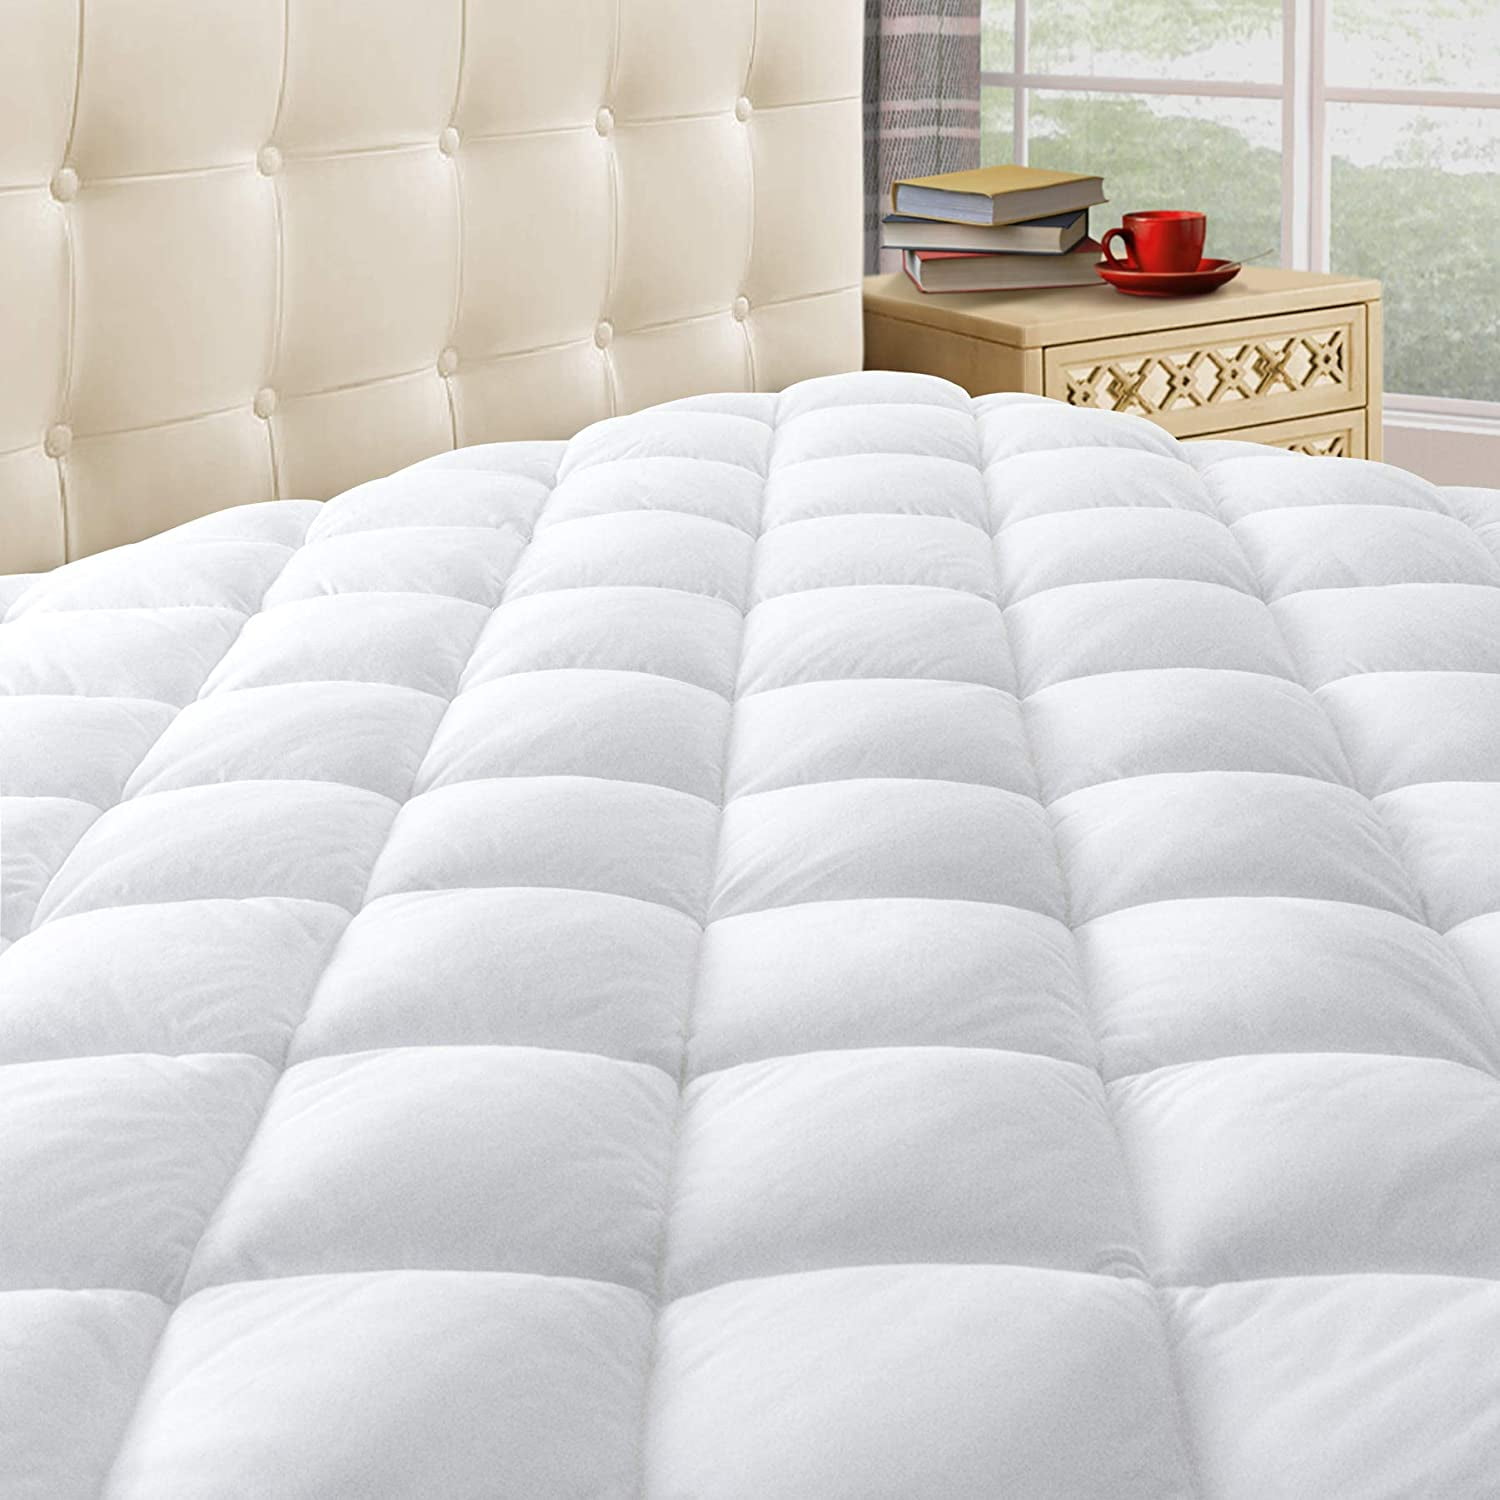 1 queen size white fitted quilted mattress pad t180 hotel 60x80x12 deep pocket 